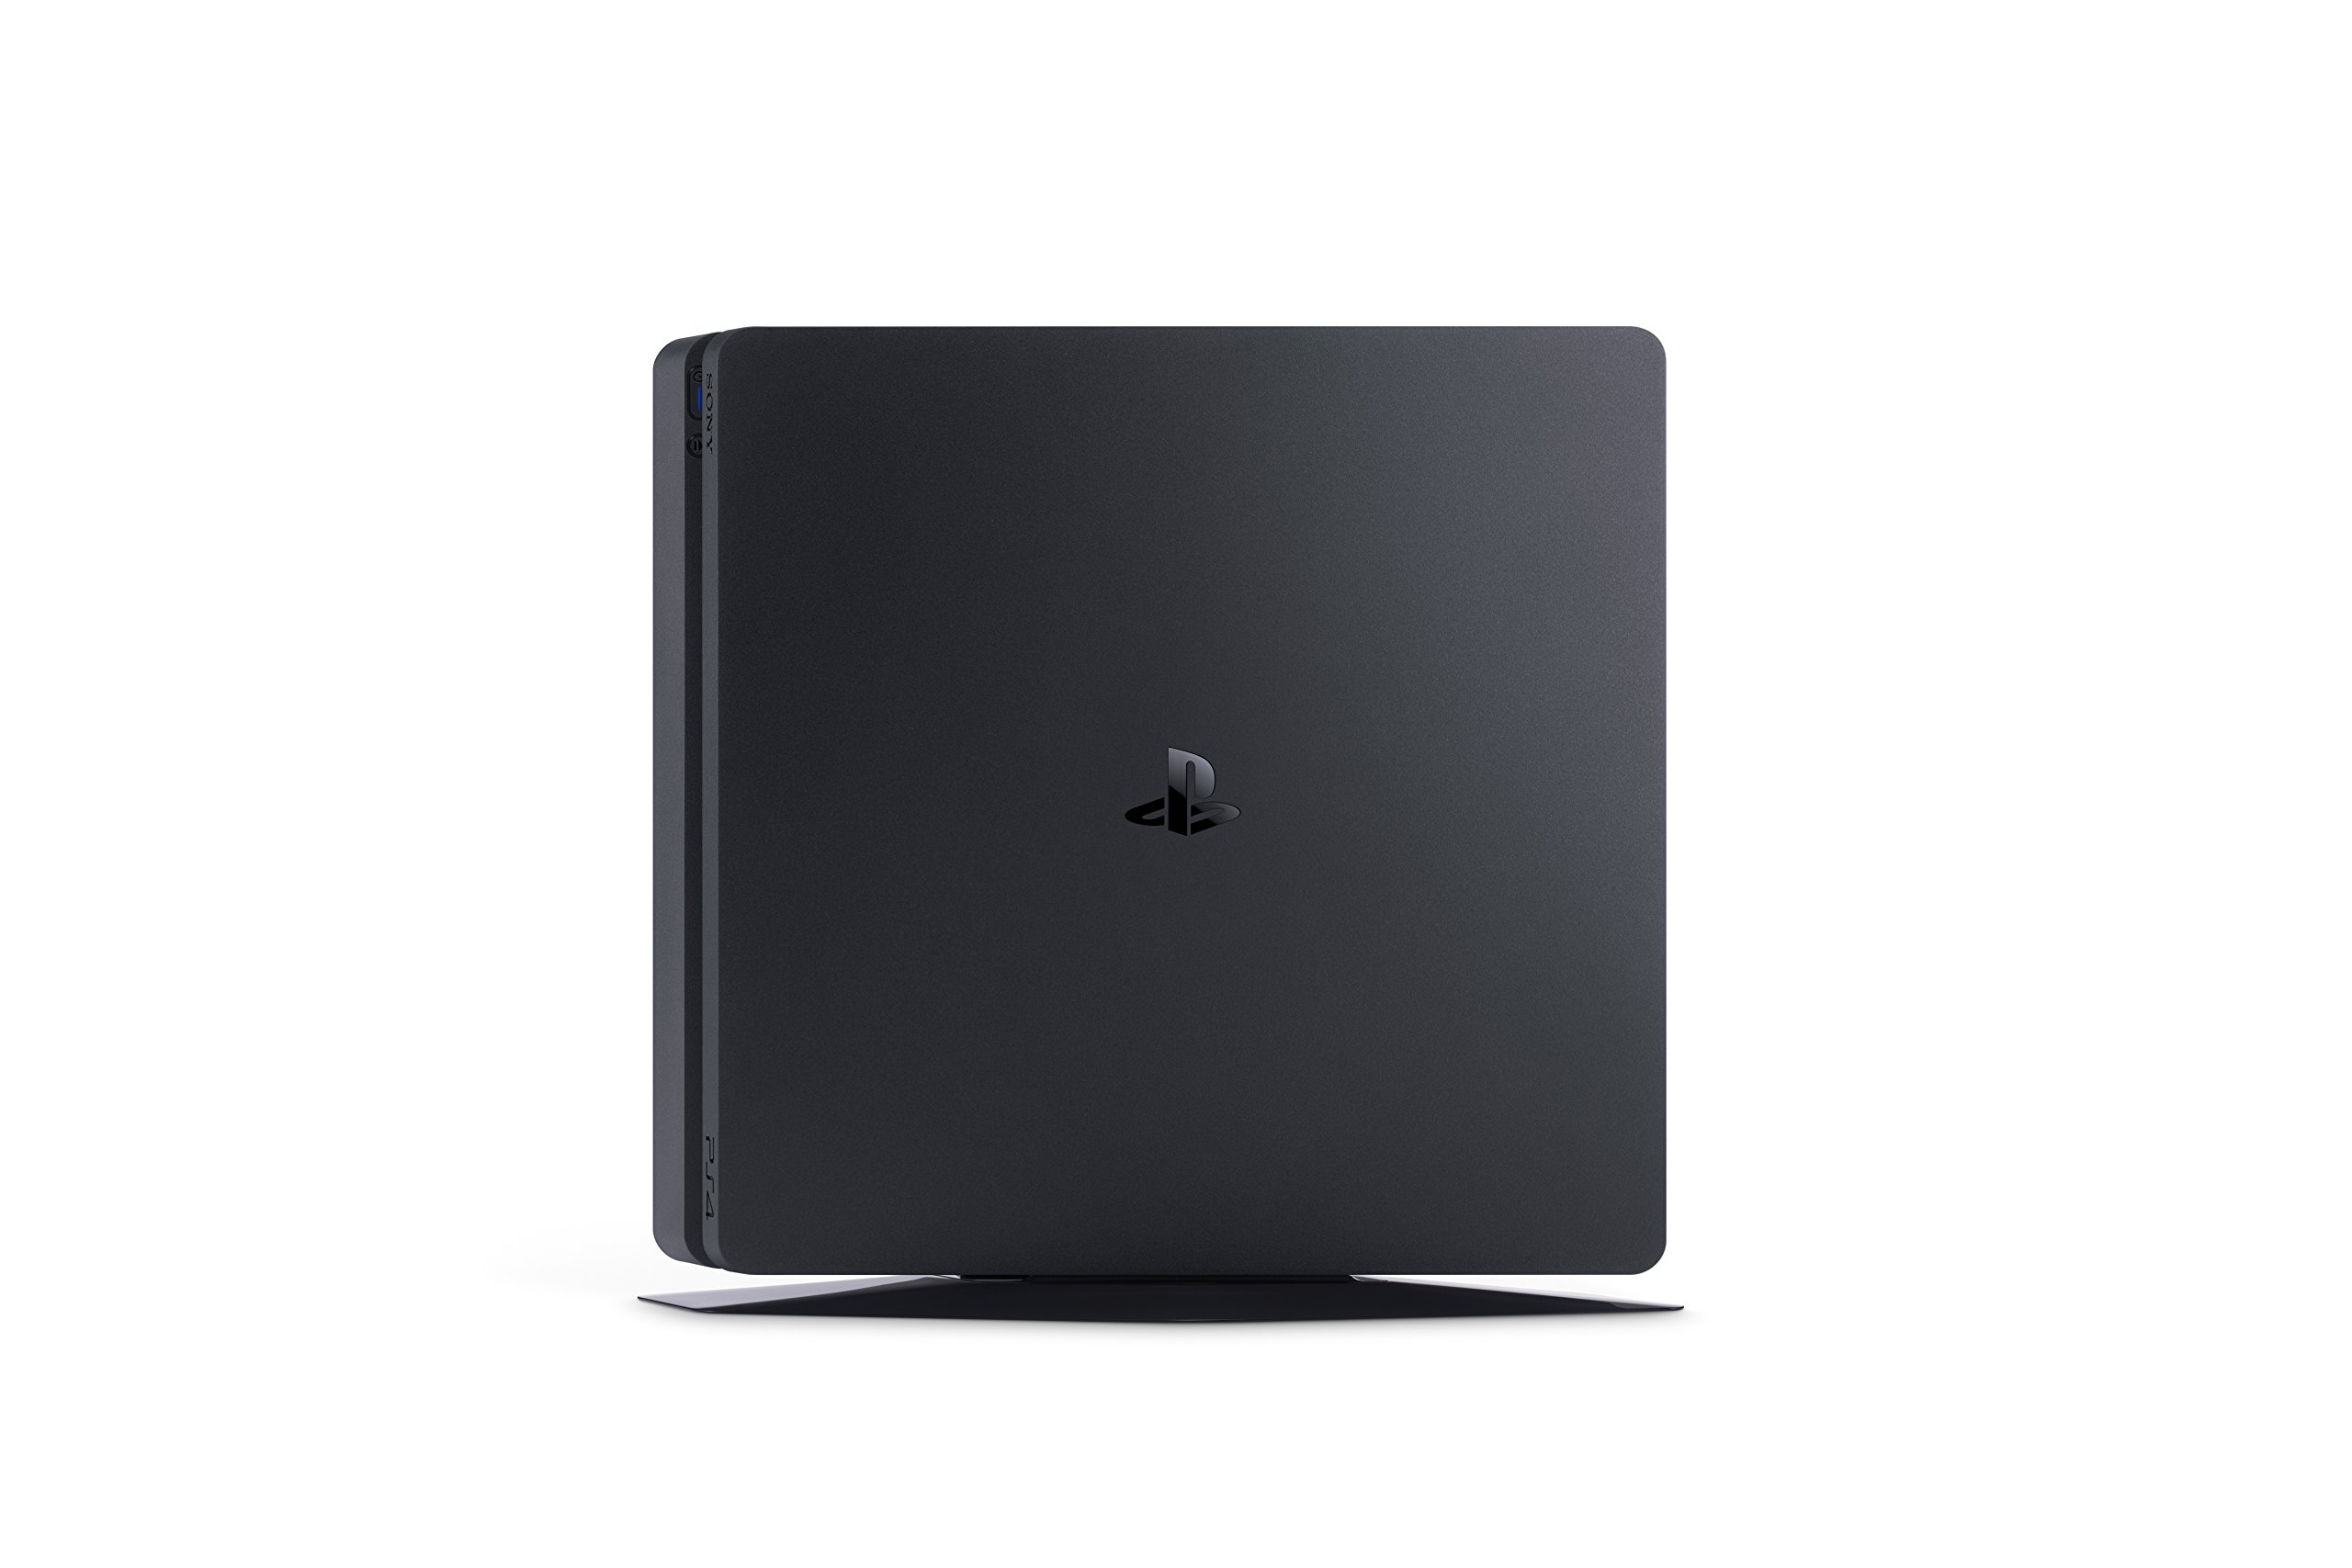 playstation 4 slim 1tb console - image 4 of 7